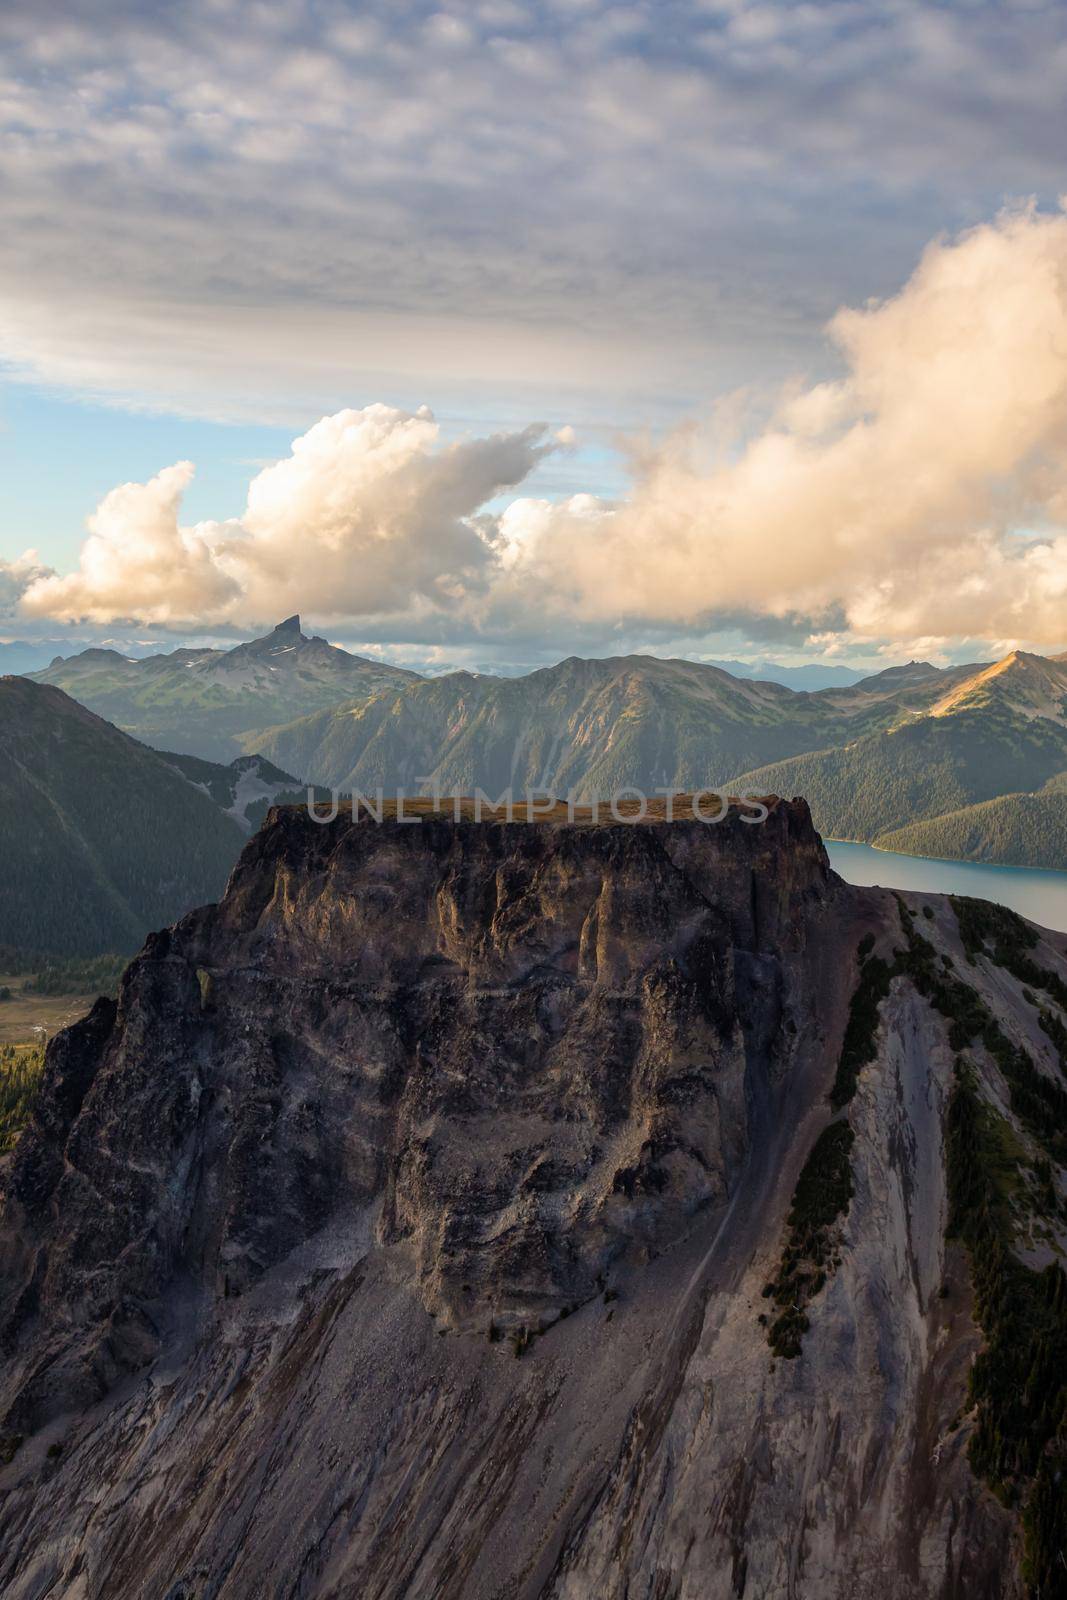 Aerial landscape view of Table Mountain with Black Tusk in the background. Picture taken in Garibaldi, BC, Canada, during a cloudy sunset.